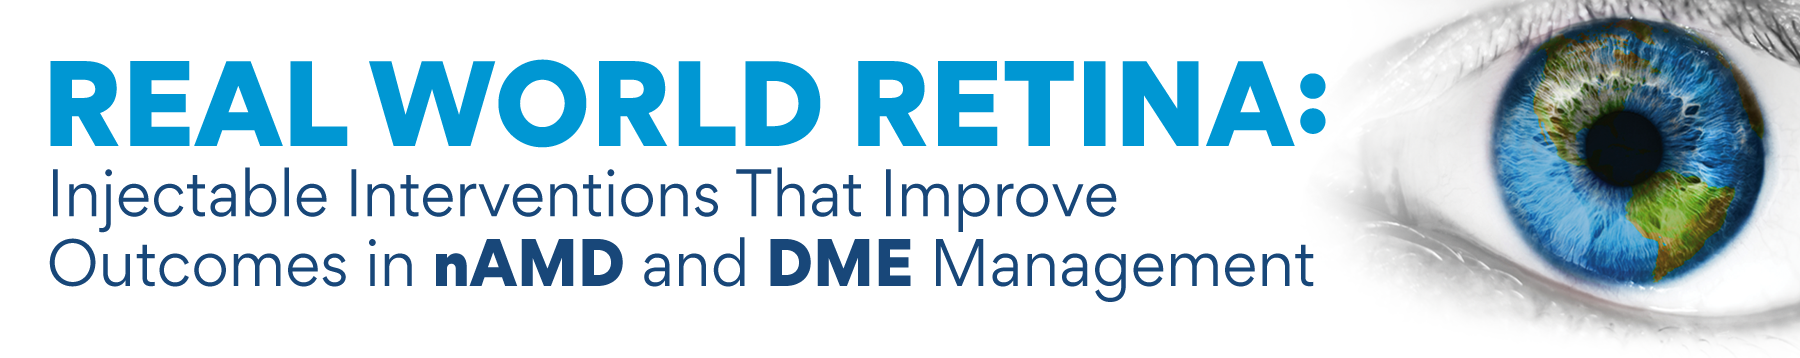 Real World Retina Injectable Interventions that Improve Outcomes in nAMD and DME Management